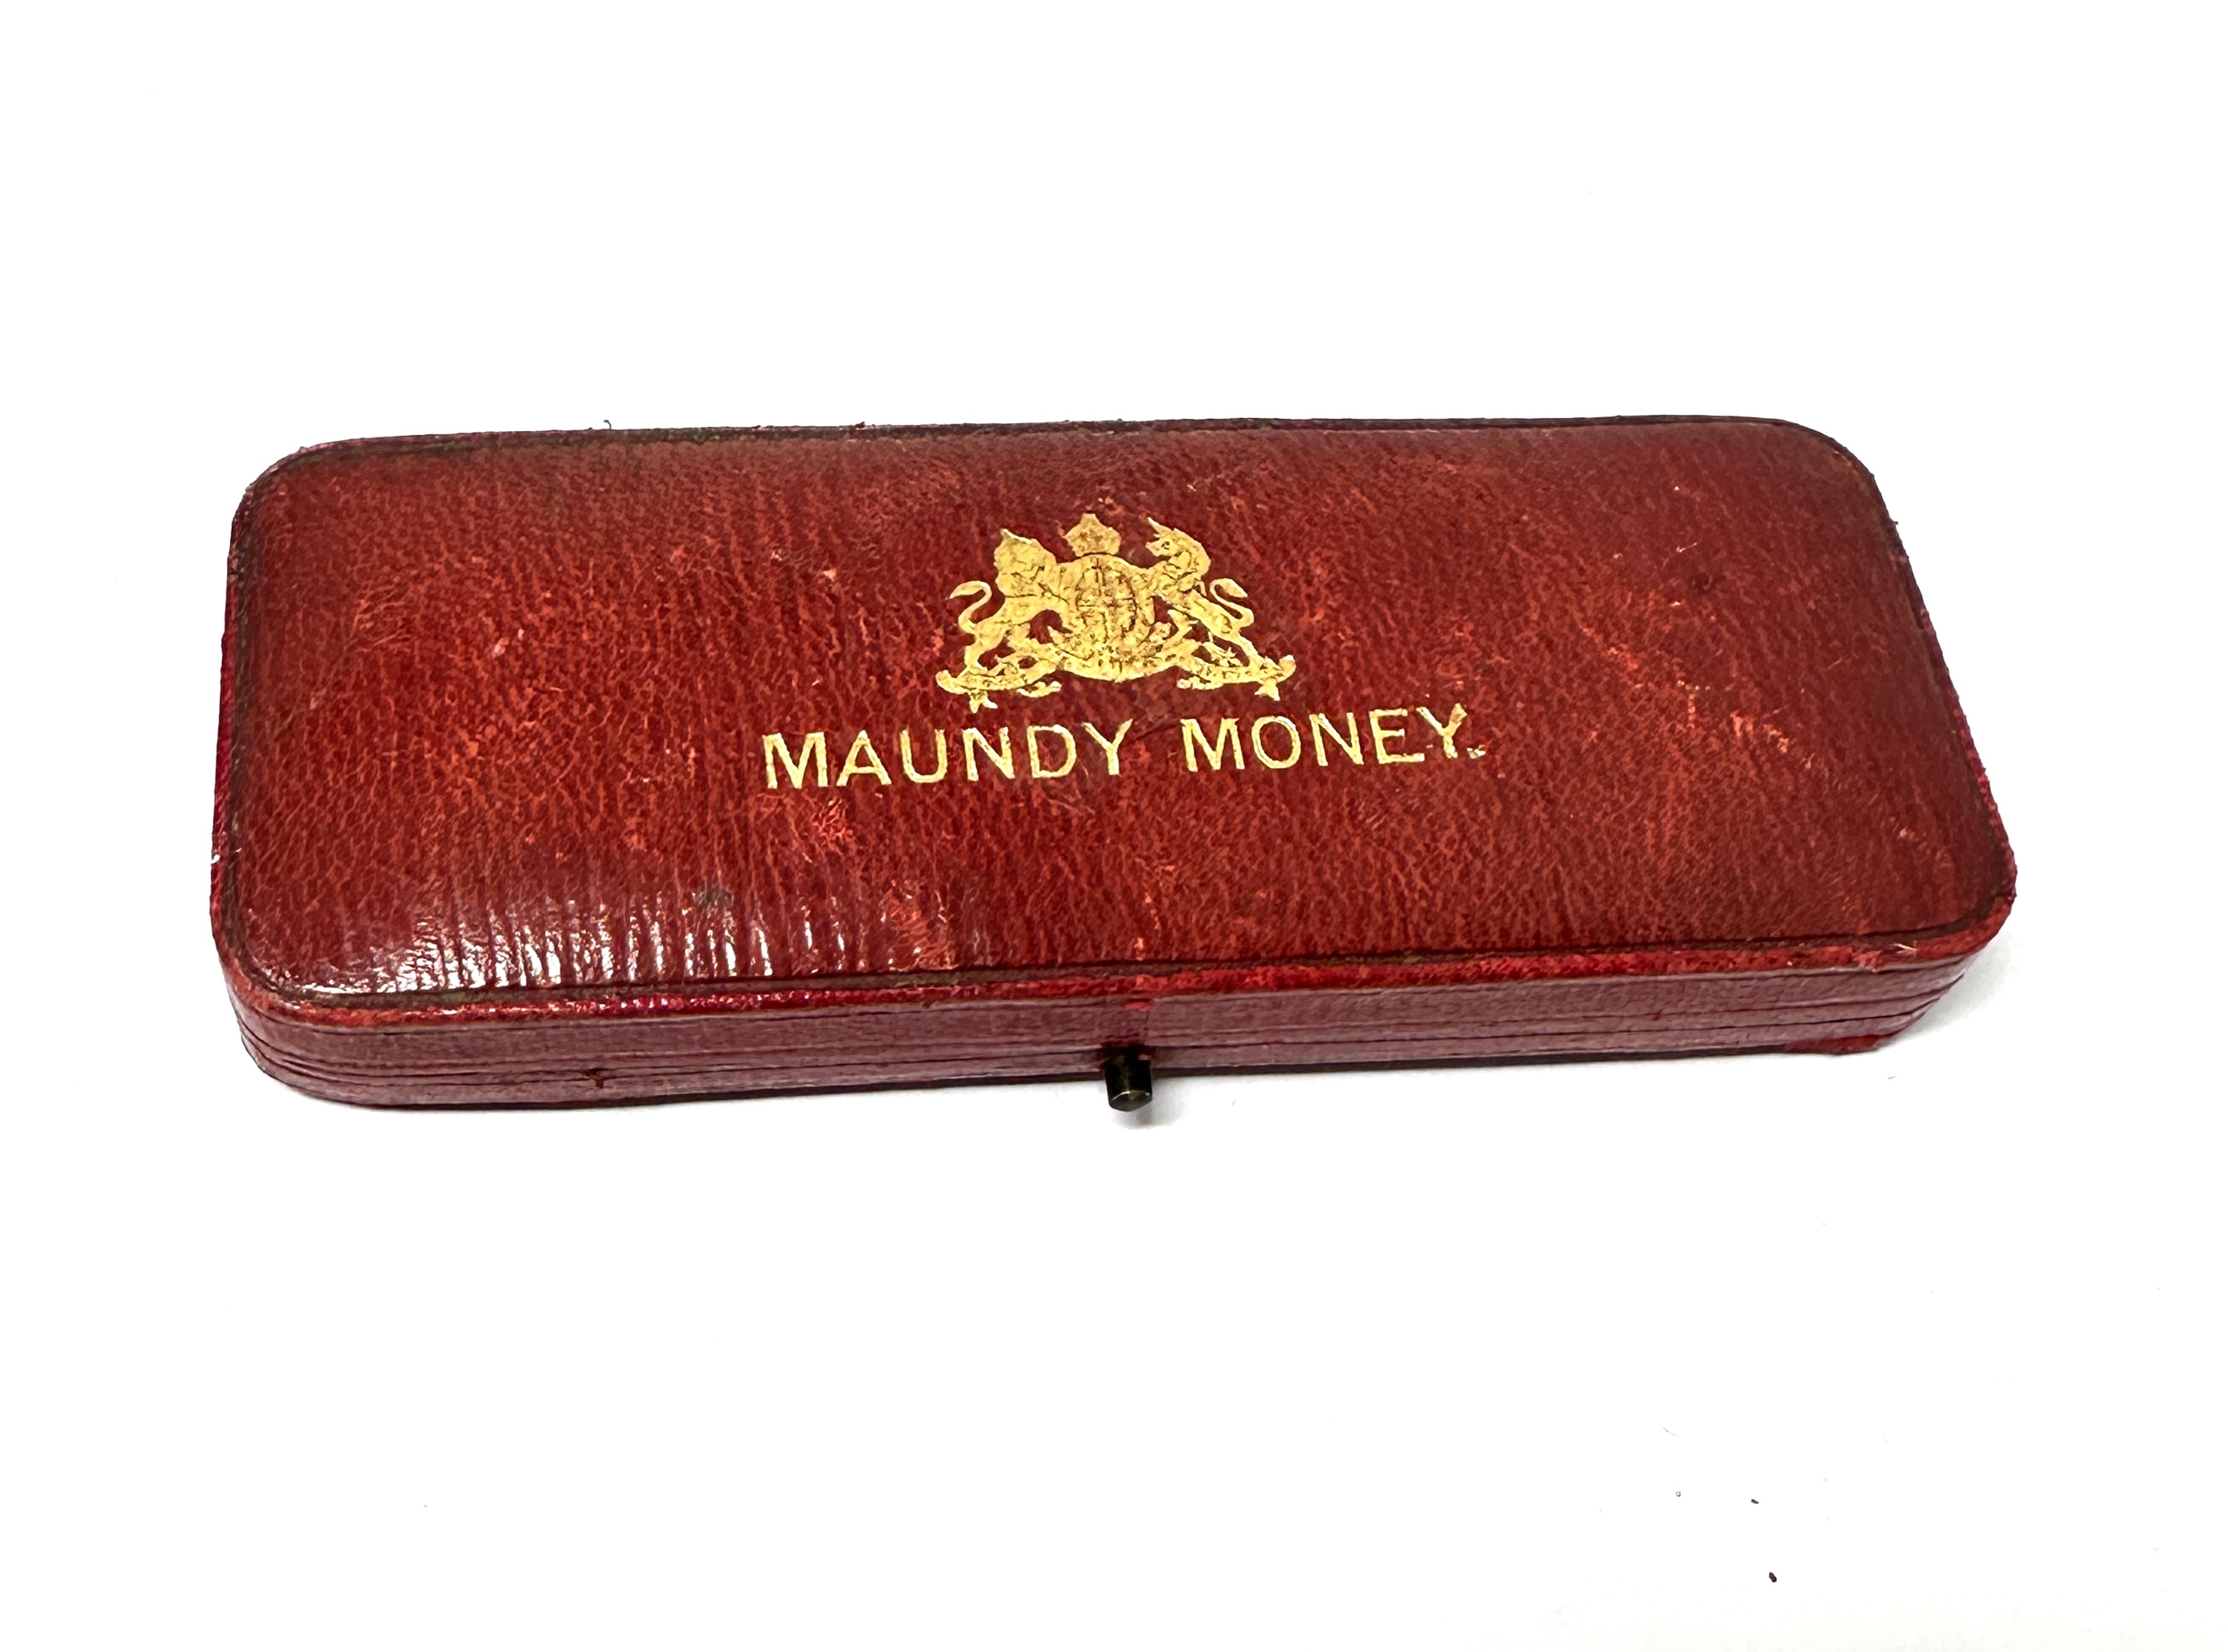 Part Queen Victoria Maundy Coin Set In Original Display Box 1901 UNC Condition missing 3 pence coin - Bild 5 aus 5